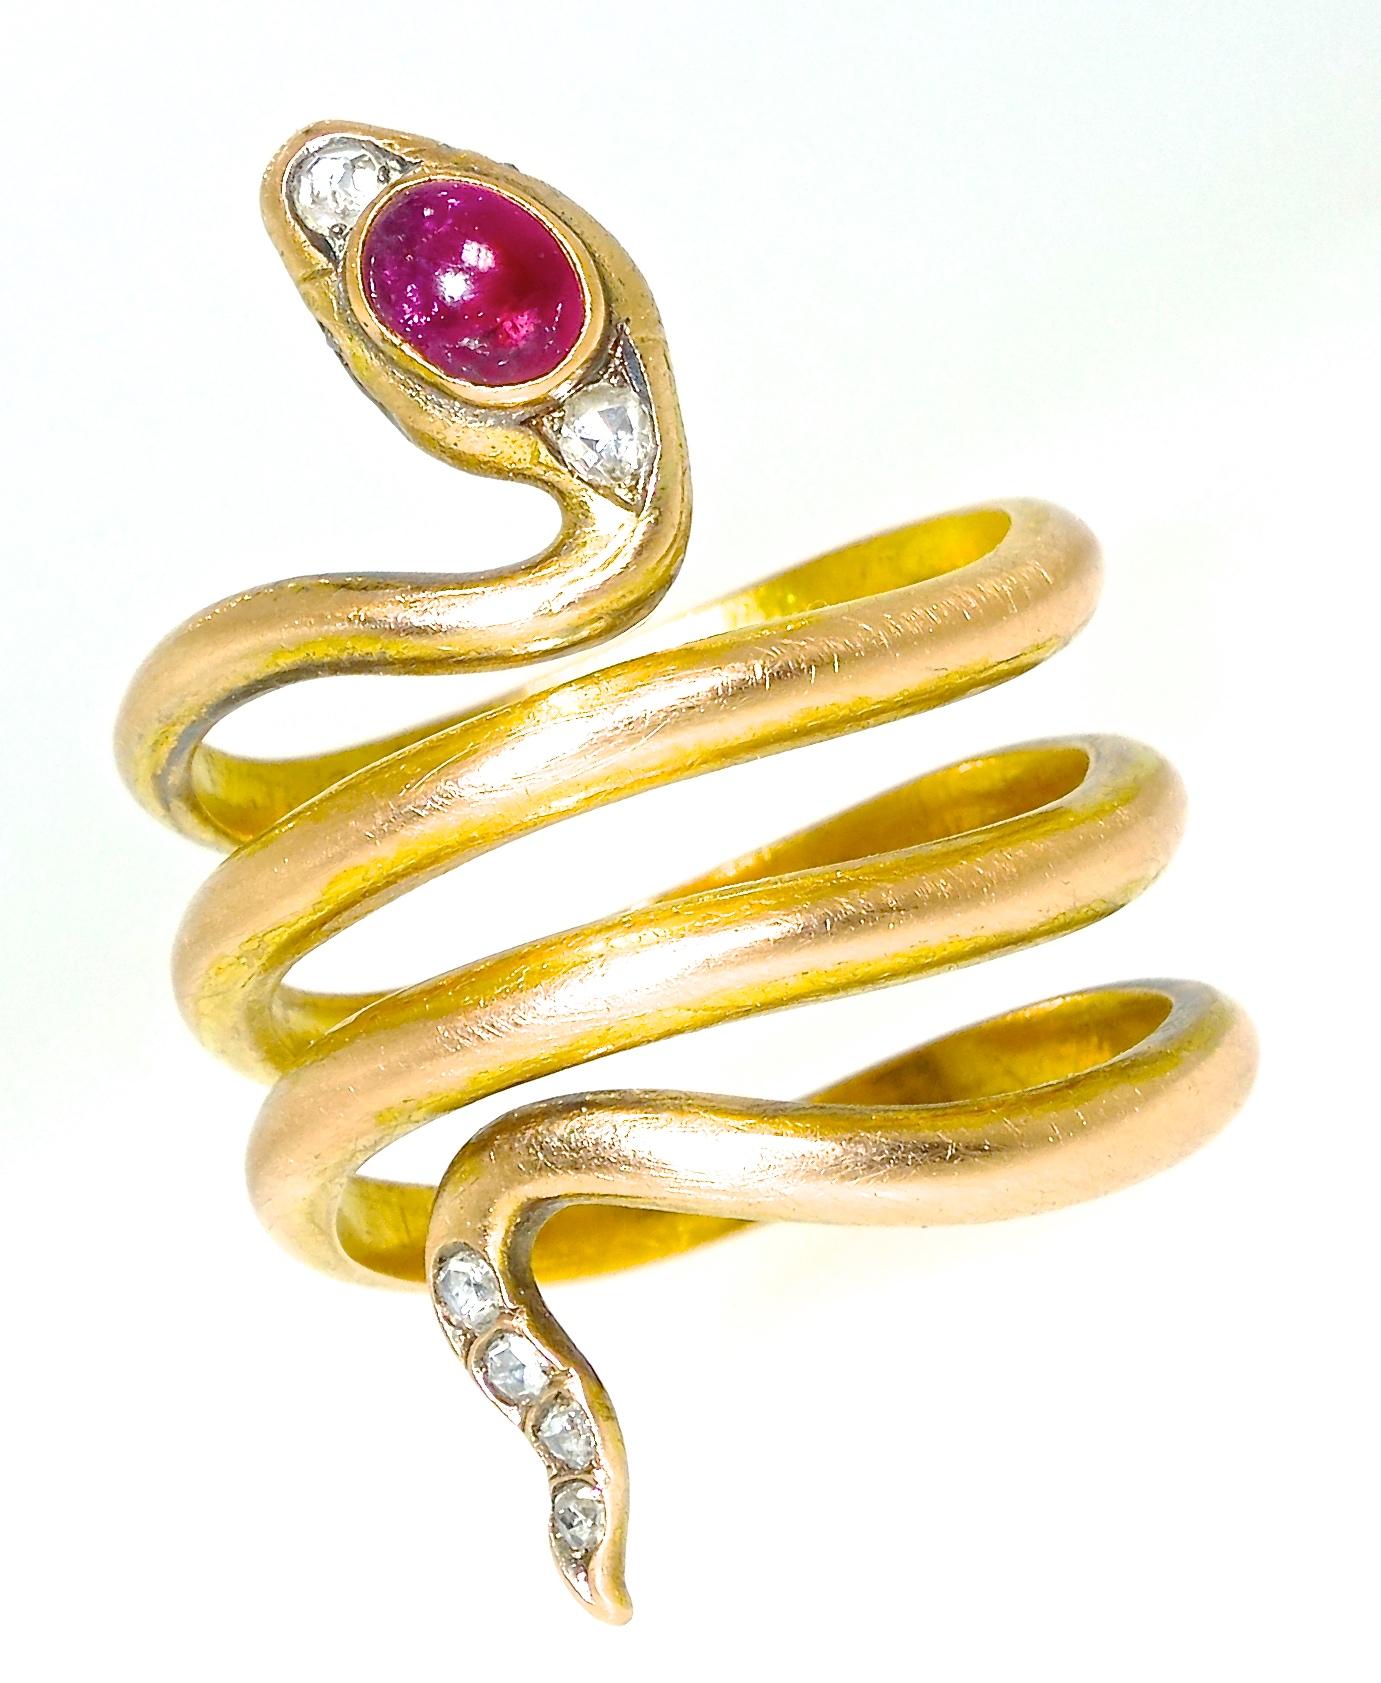 Faberge, workmates Erik Kollin, snake ring, gold, rose-cut diamonds in the head, eyes and tail, and with a cabochon ruby in his head.  Signed fully with St Petersburg marks, this snake ring, in fine condition, is physically large, from head to tail